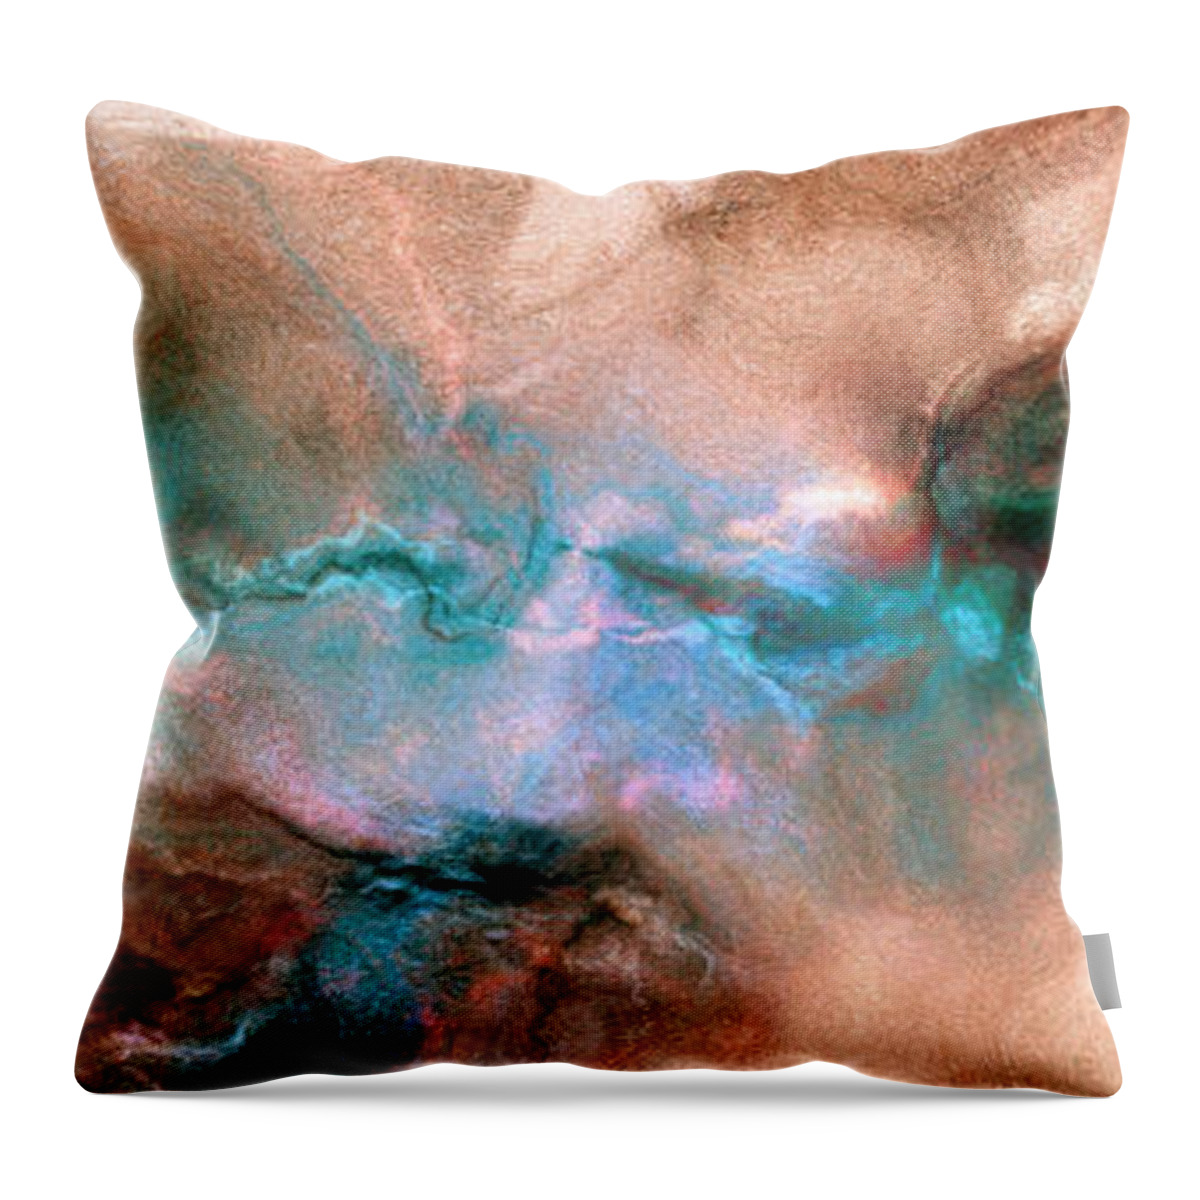 Abstract Art Throw Pillow featuring the painting Imagination - Abstract Art by Jaison Cianelli